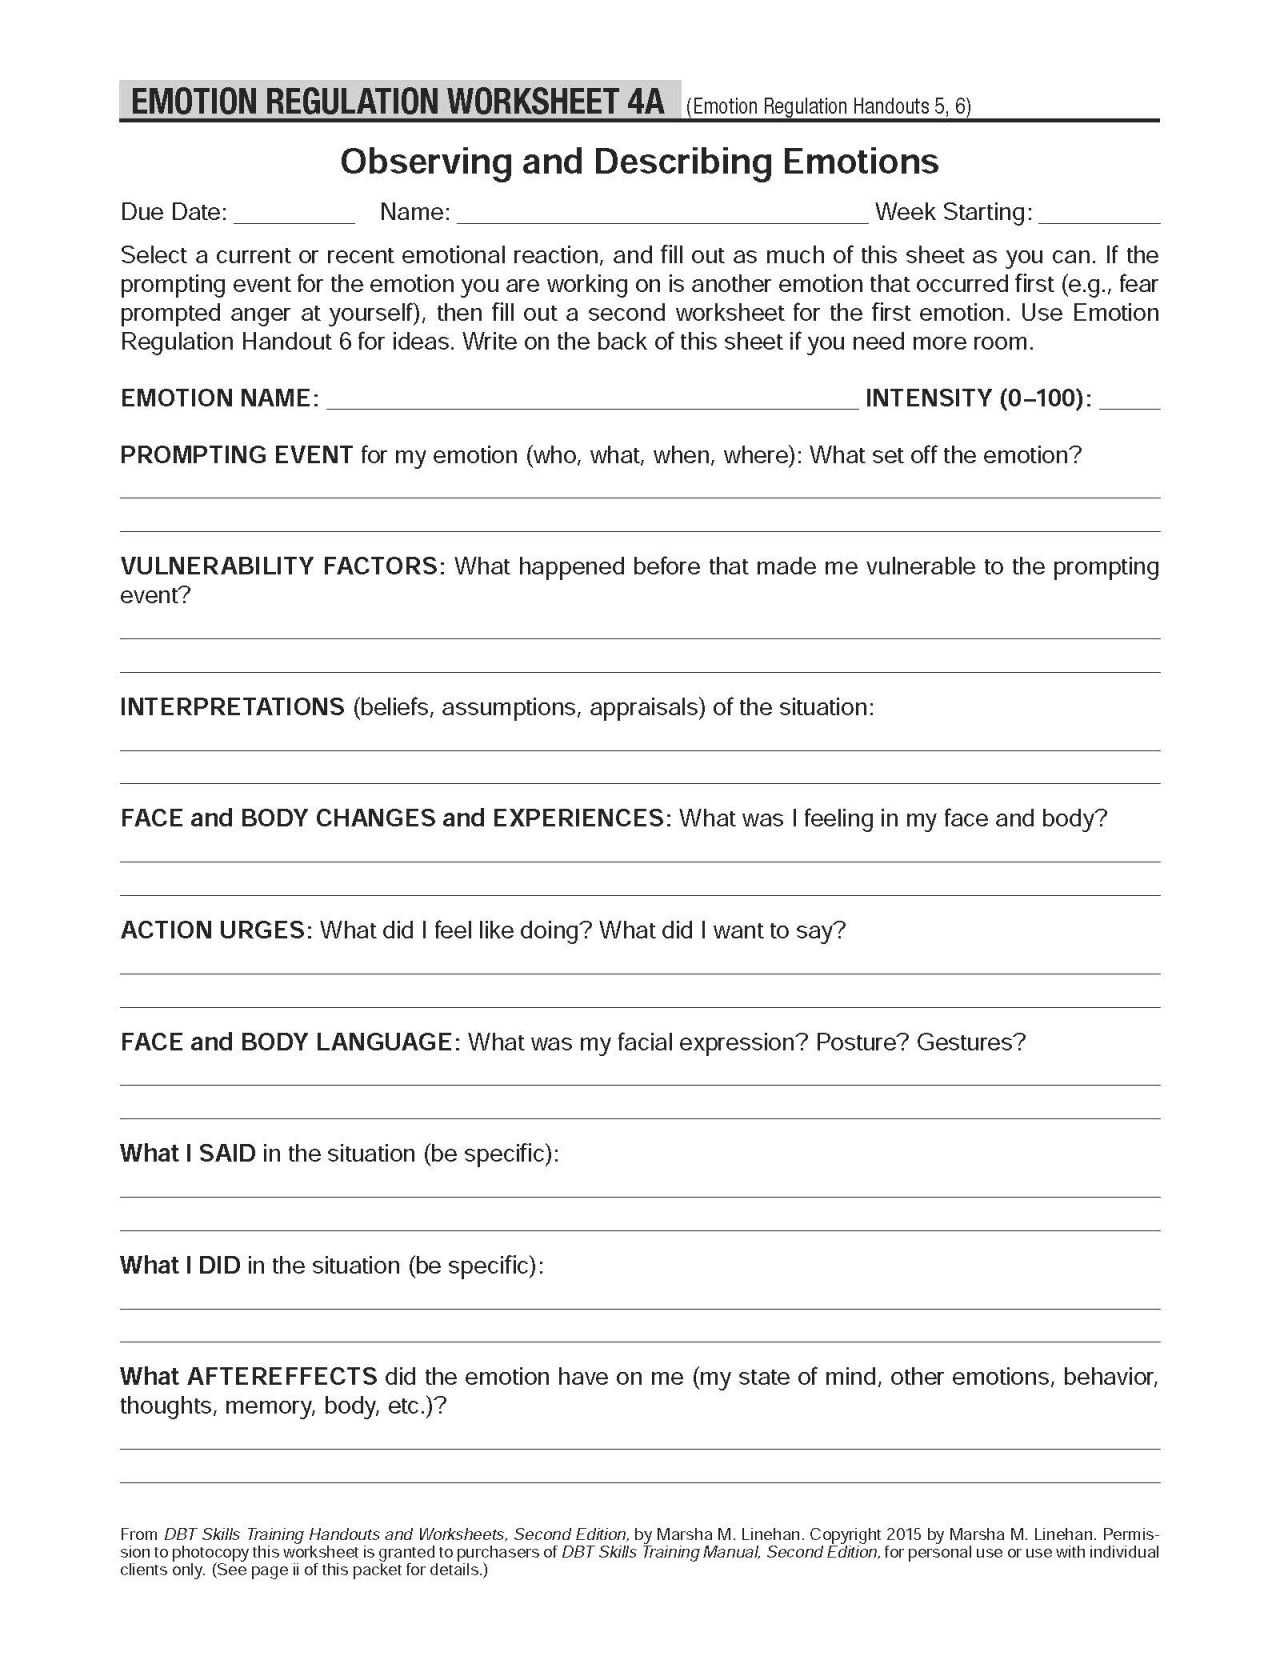 Positive Psychology Worksheets Along with Redefiningbodyimage “ This Looks Like A Really Wonderful Worksheet